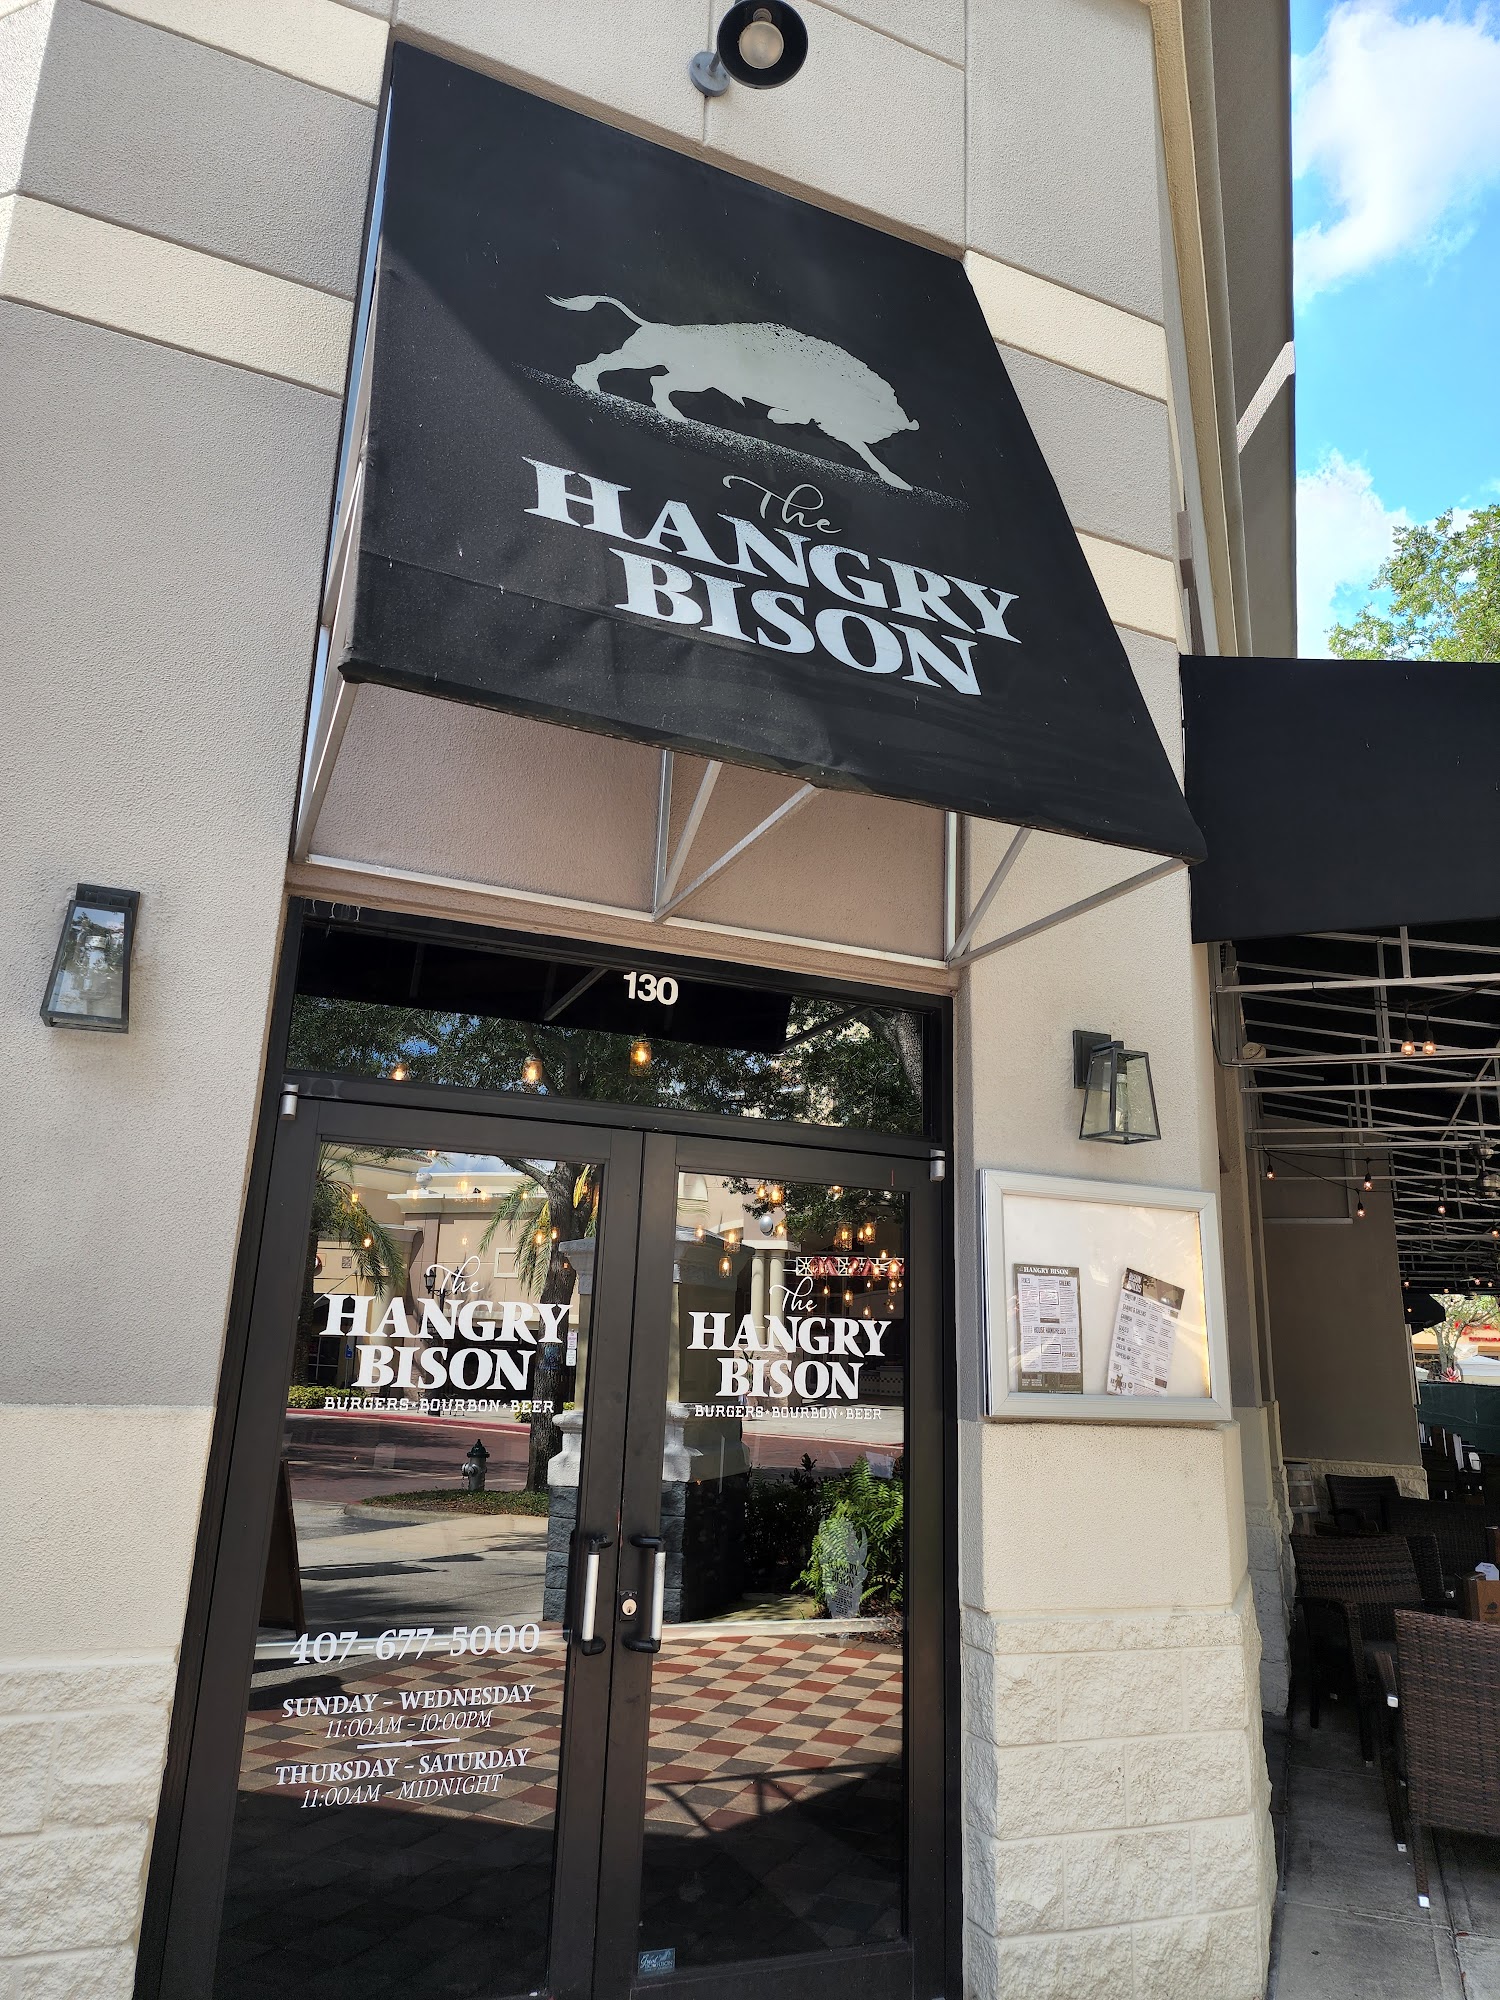 The Hangry Bison